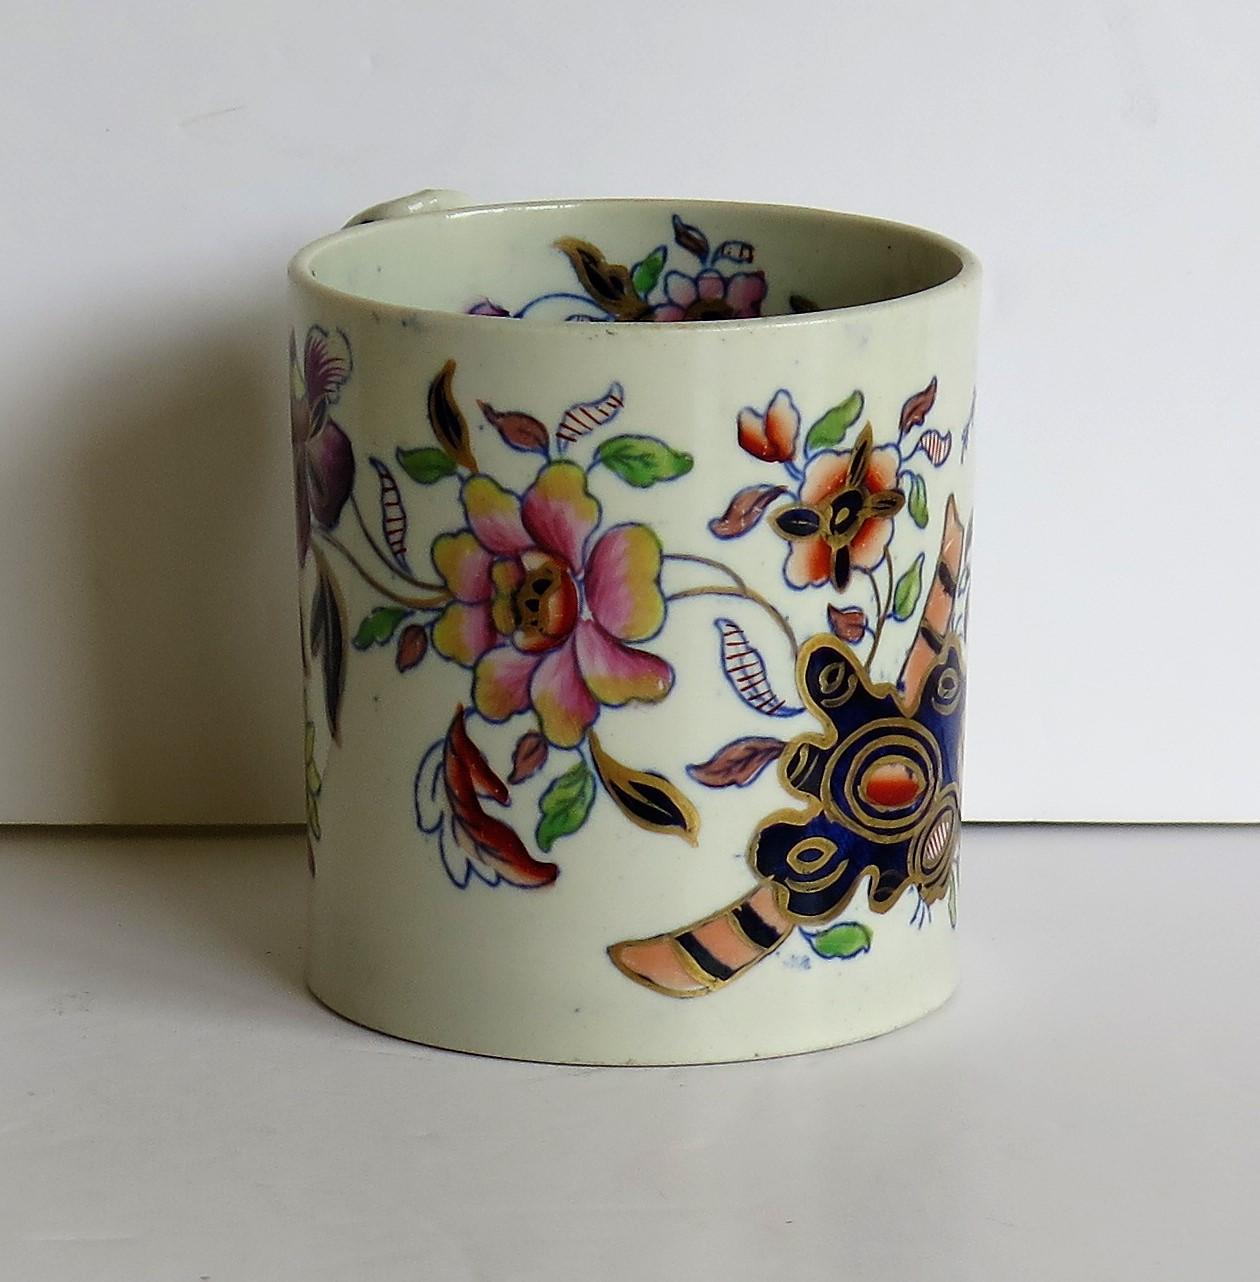 This is a rare and early stone China (Ironstone) mug which dates to the George 111 period, circa 1815 made by the Davenport factory of Longport, Staffordshire Potteries, England.

The mug is straight sided similar to a coffee can and has a loop